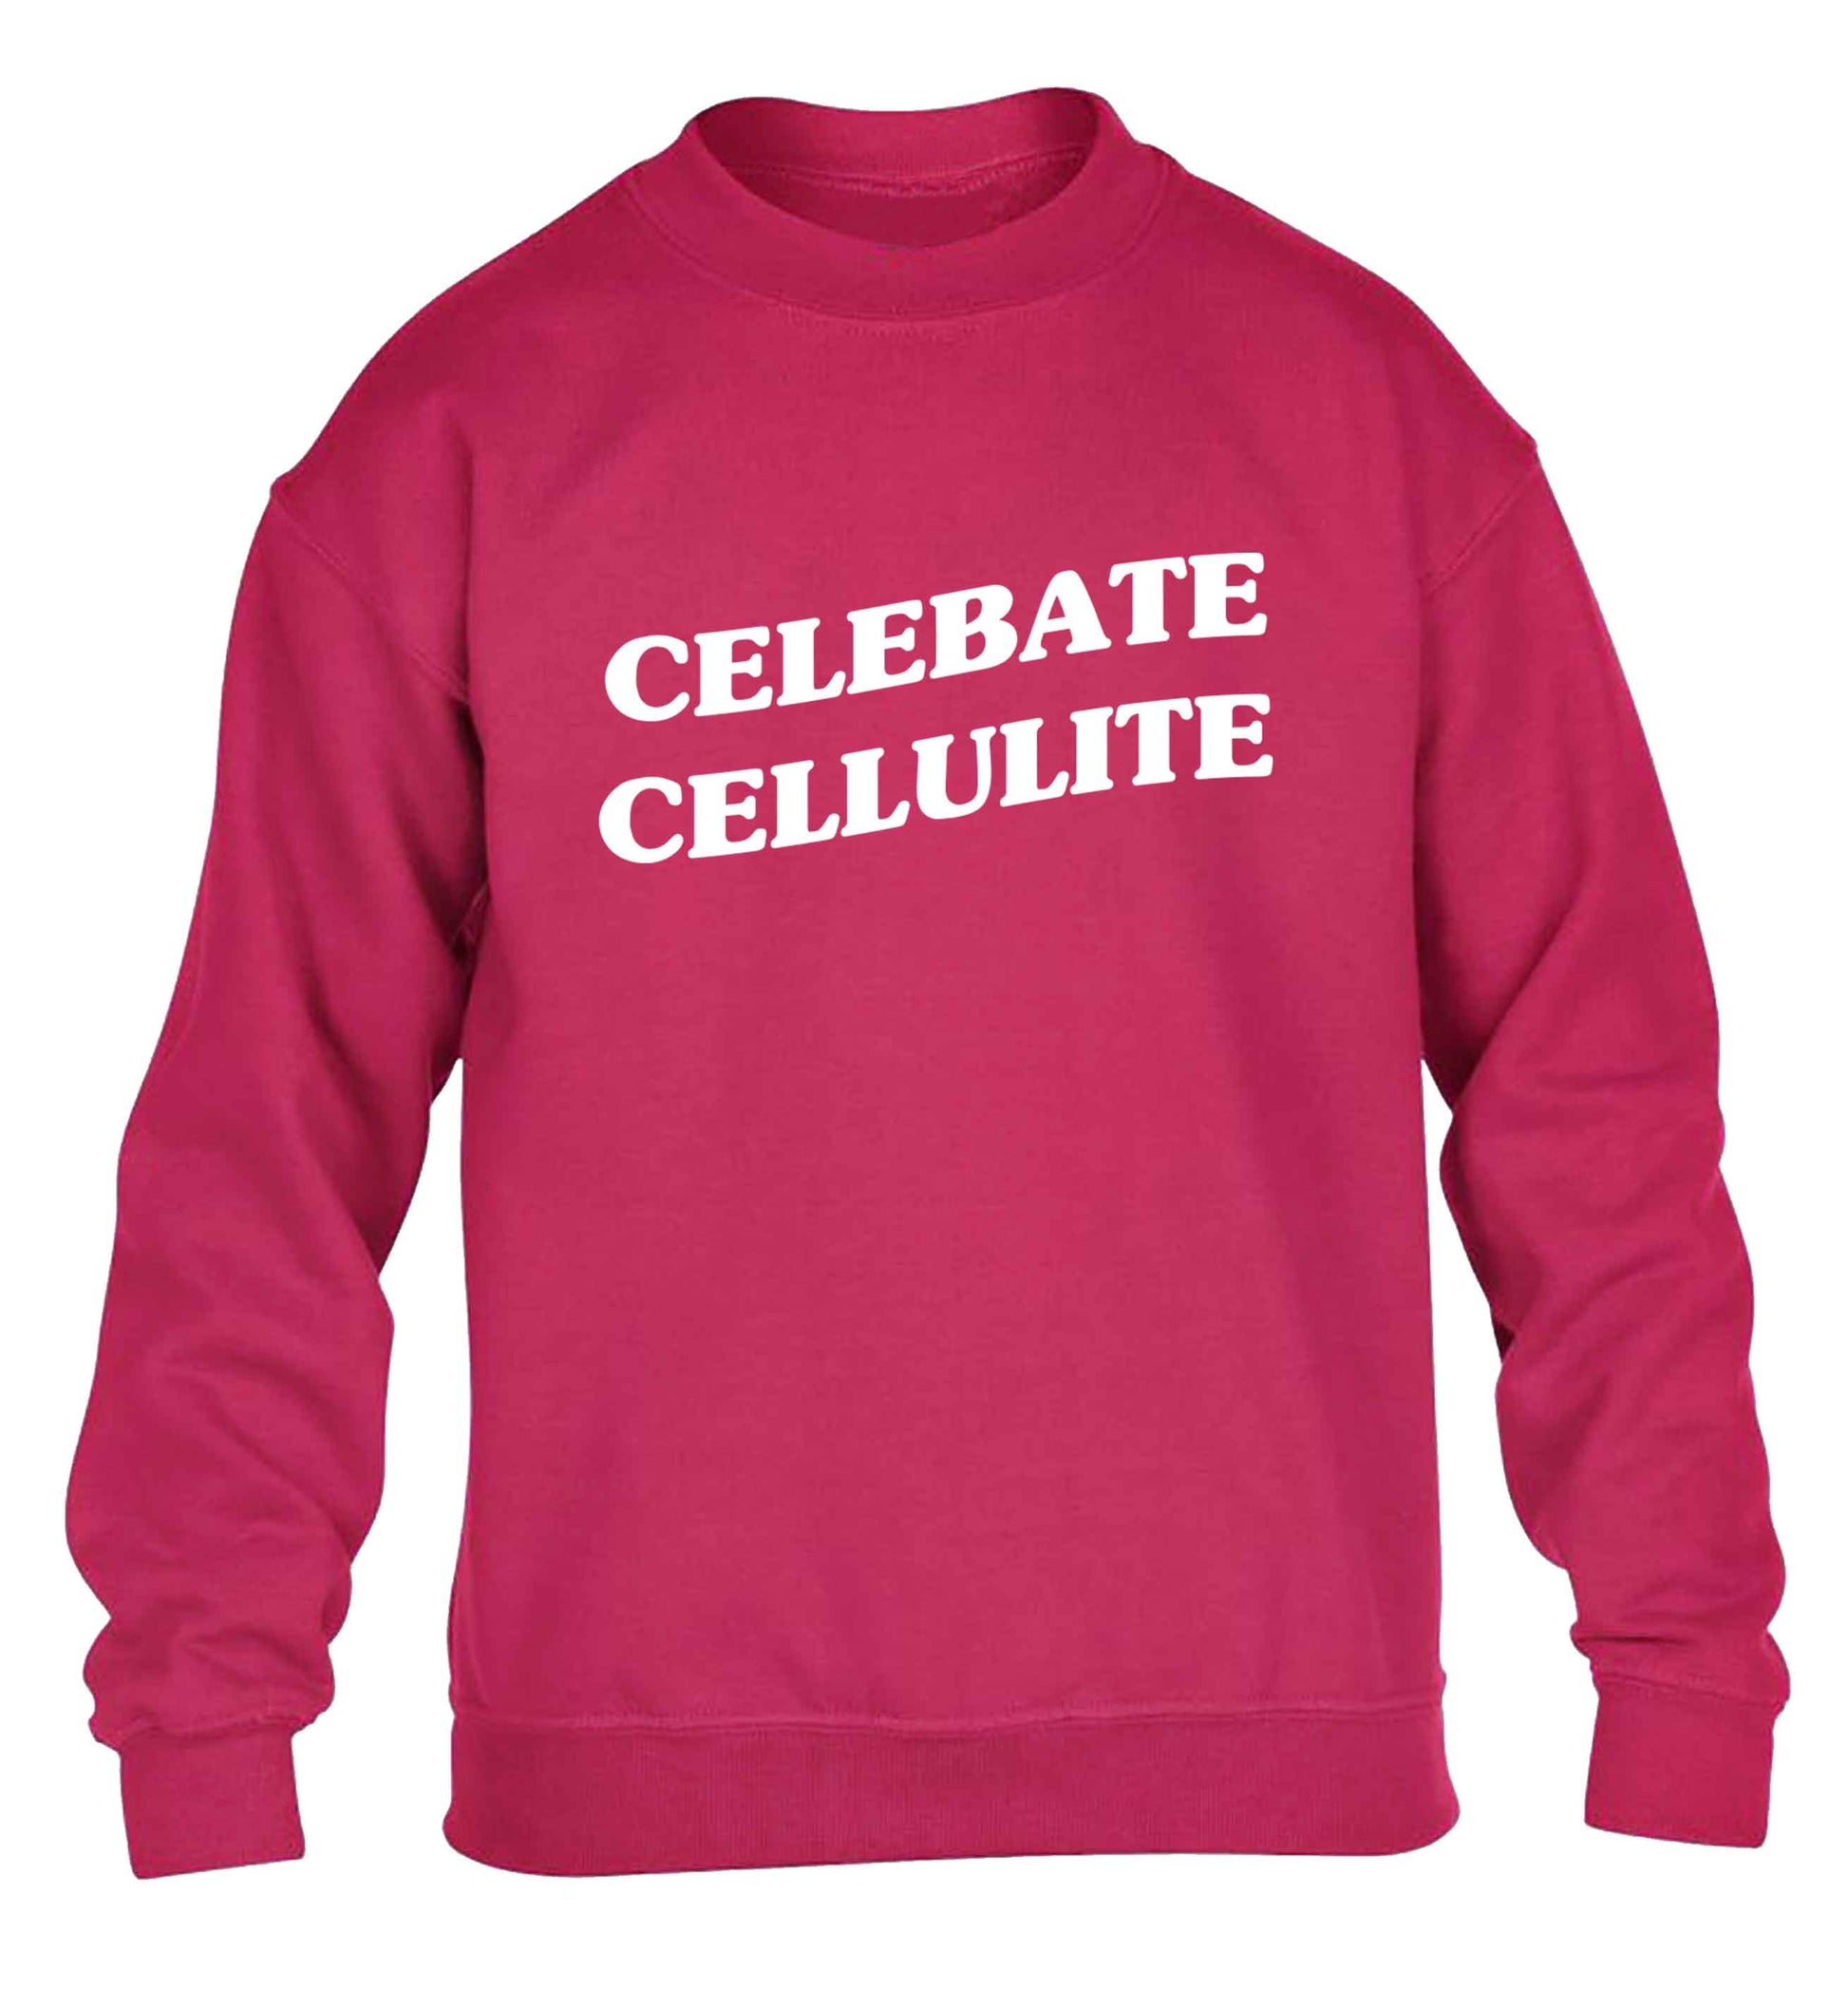 Celebrate cellulite children's pink sweater 12-13 Years